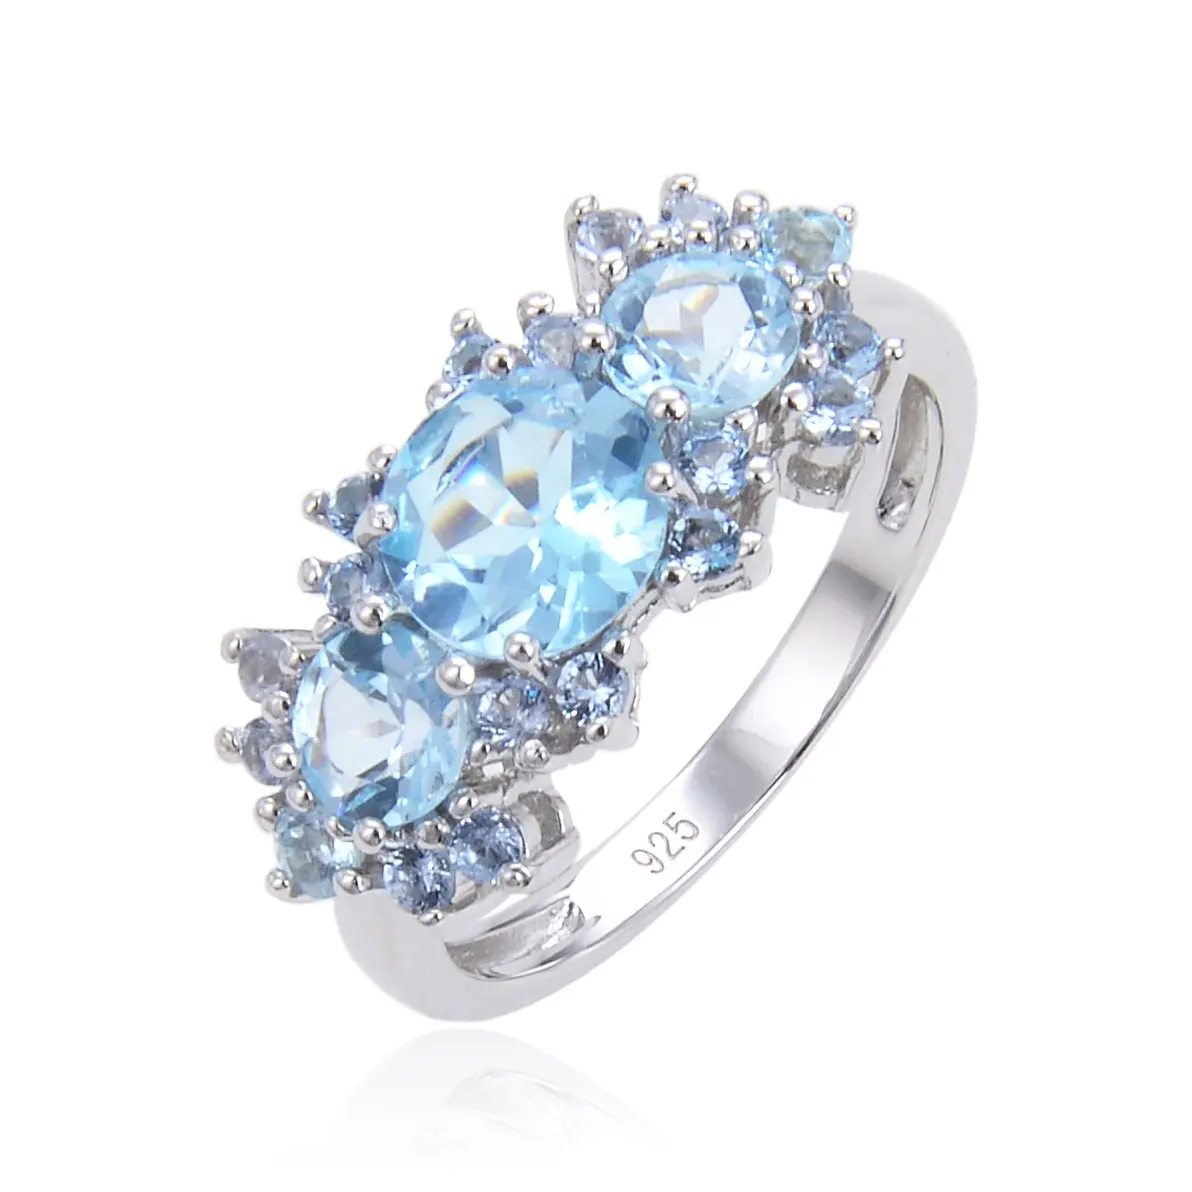 Abiding Fashion Bands Ring Natural Sky Blue Topaz Gemstone Classical 925 Sterling Silver Jewelry Women Ring For Wedding